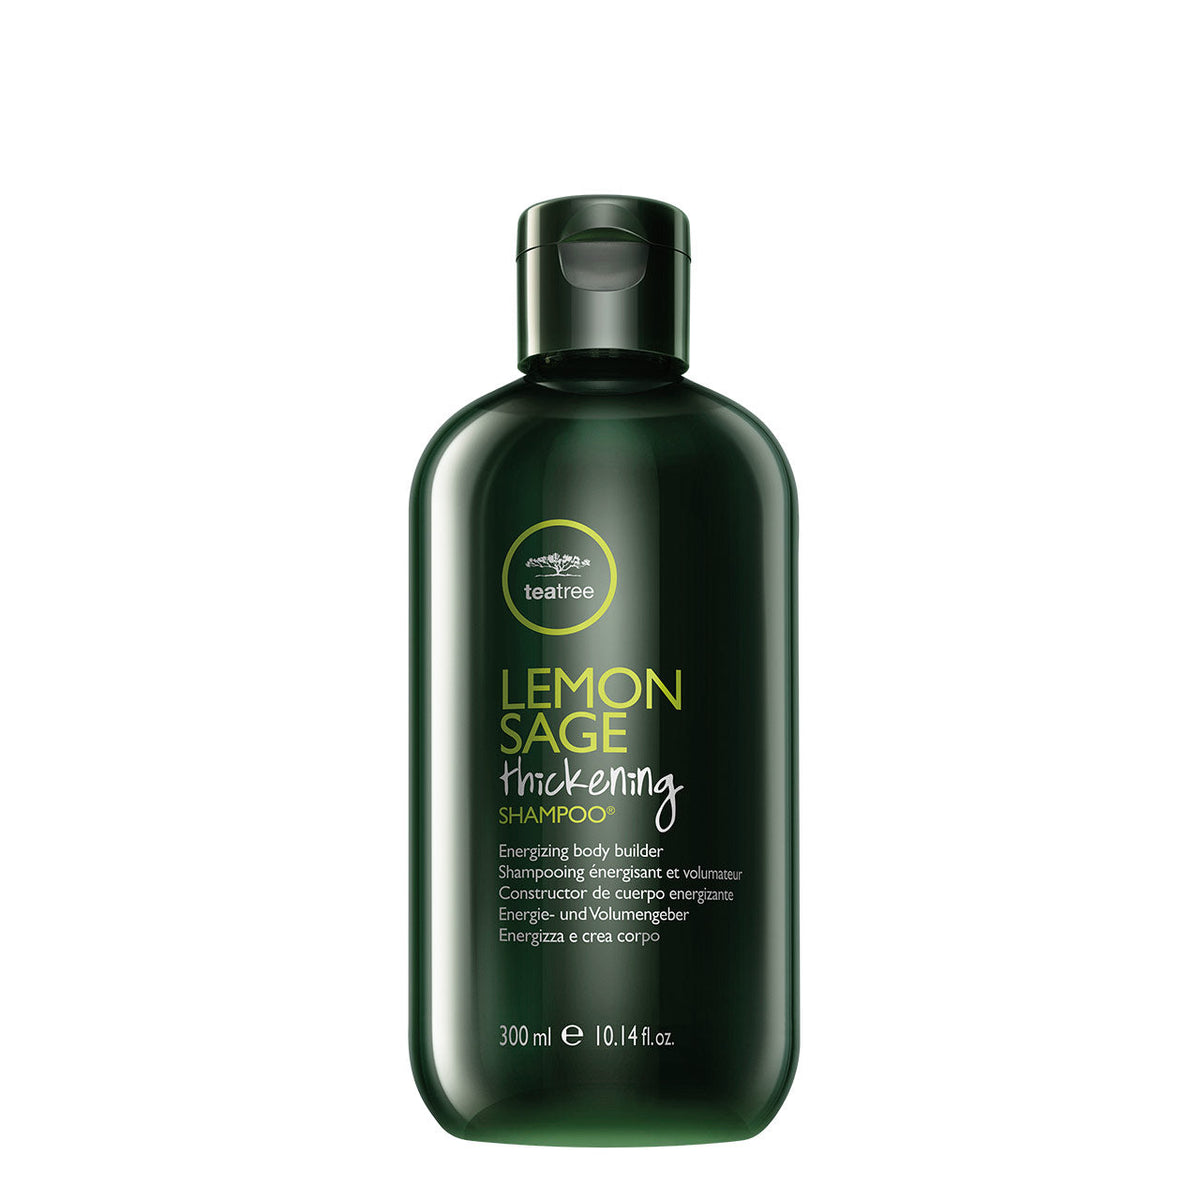 Tea Tree Lemon Sage Thickening Shampoo - 300ML - by Paul Mitchell |ProCare Outlet|